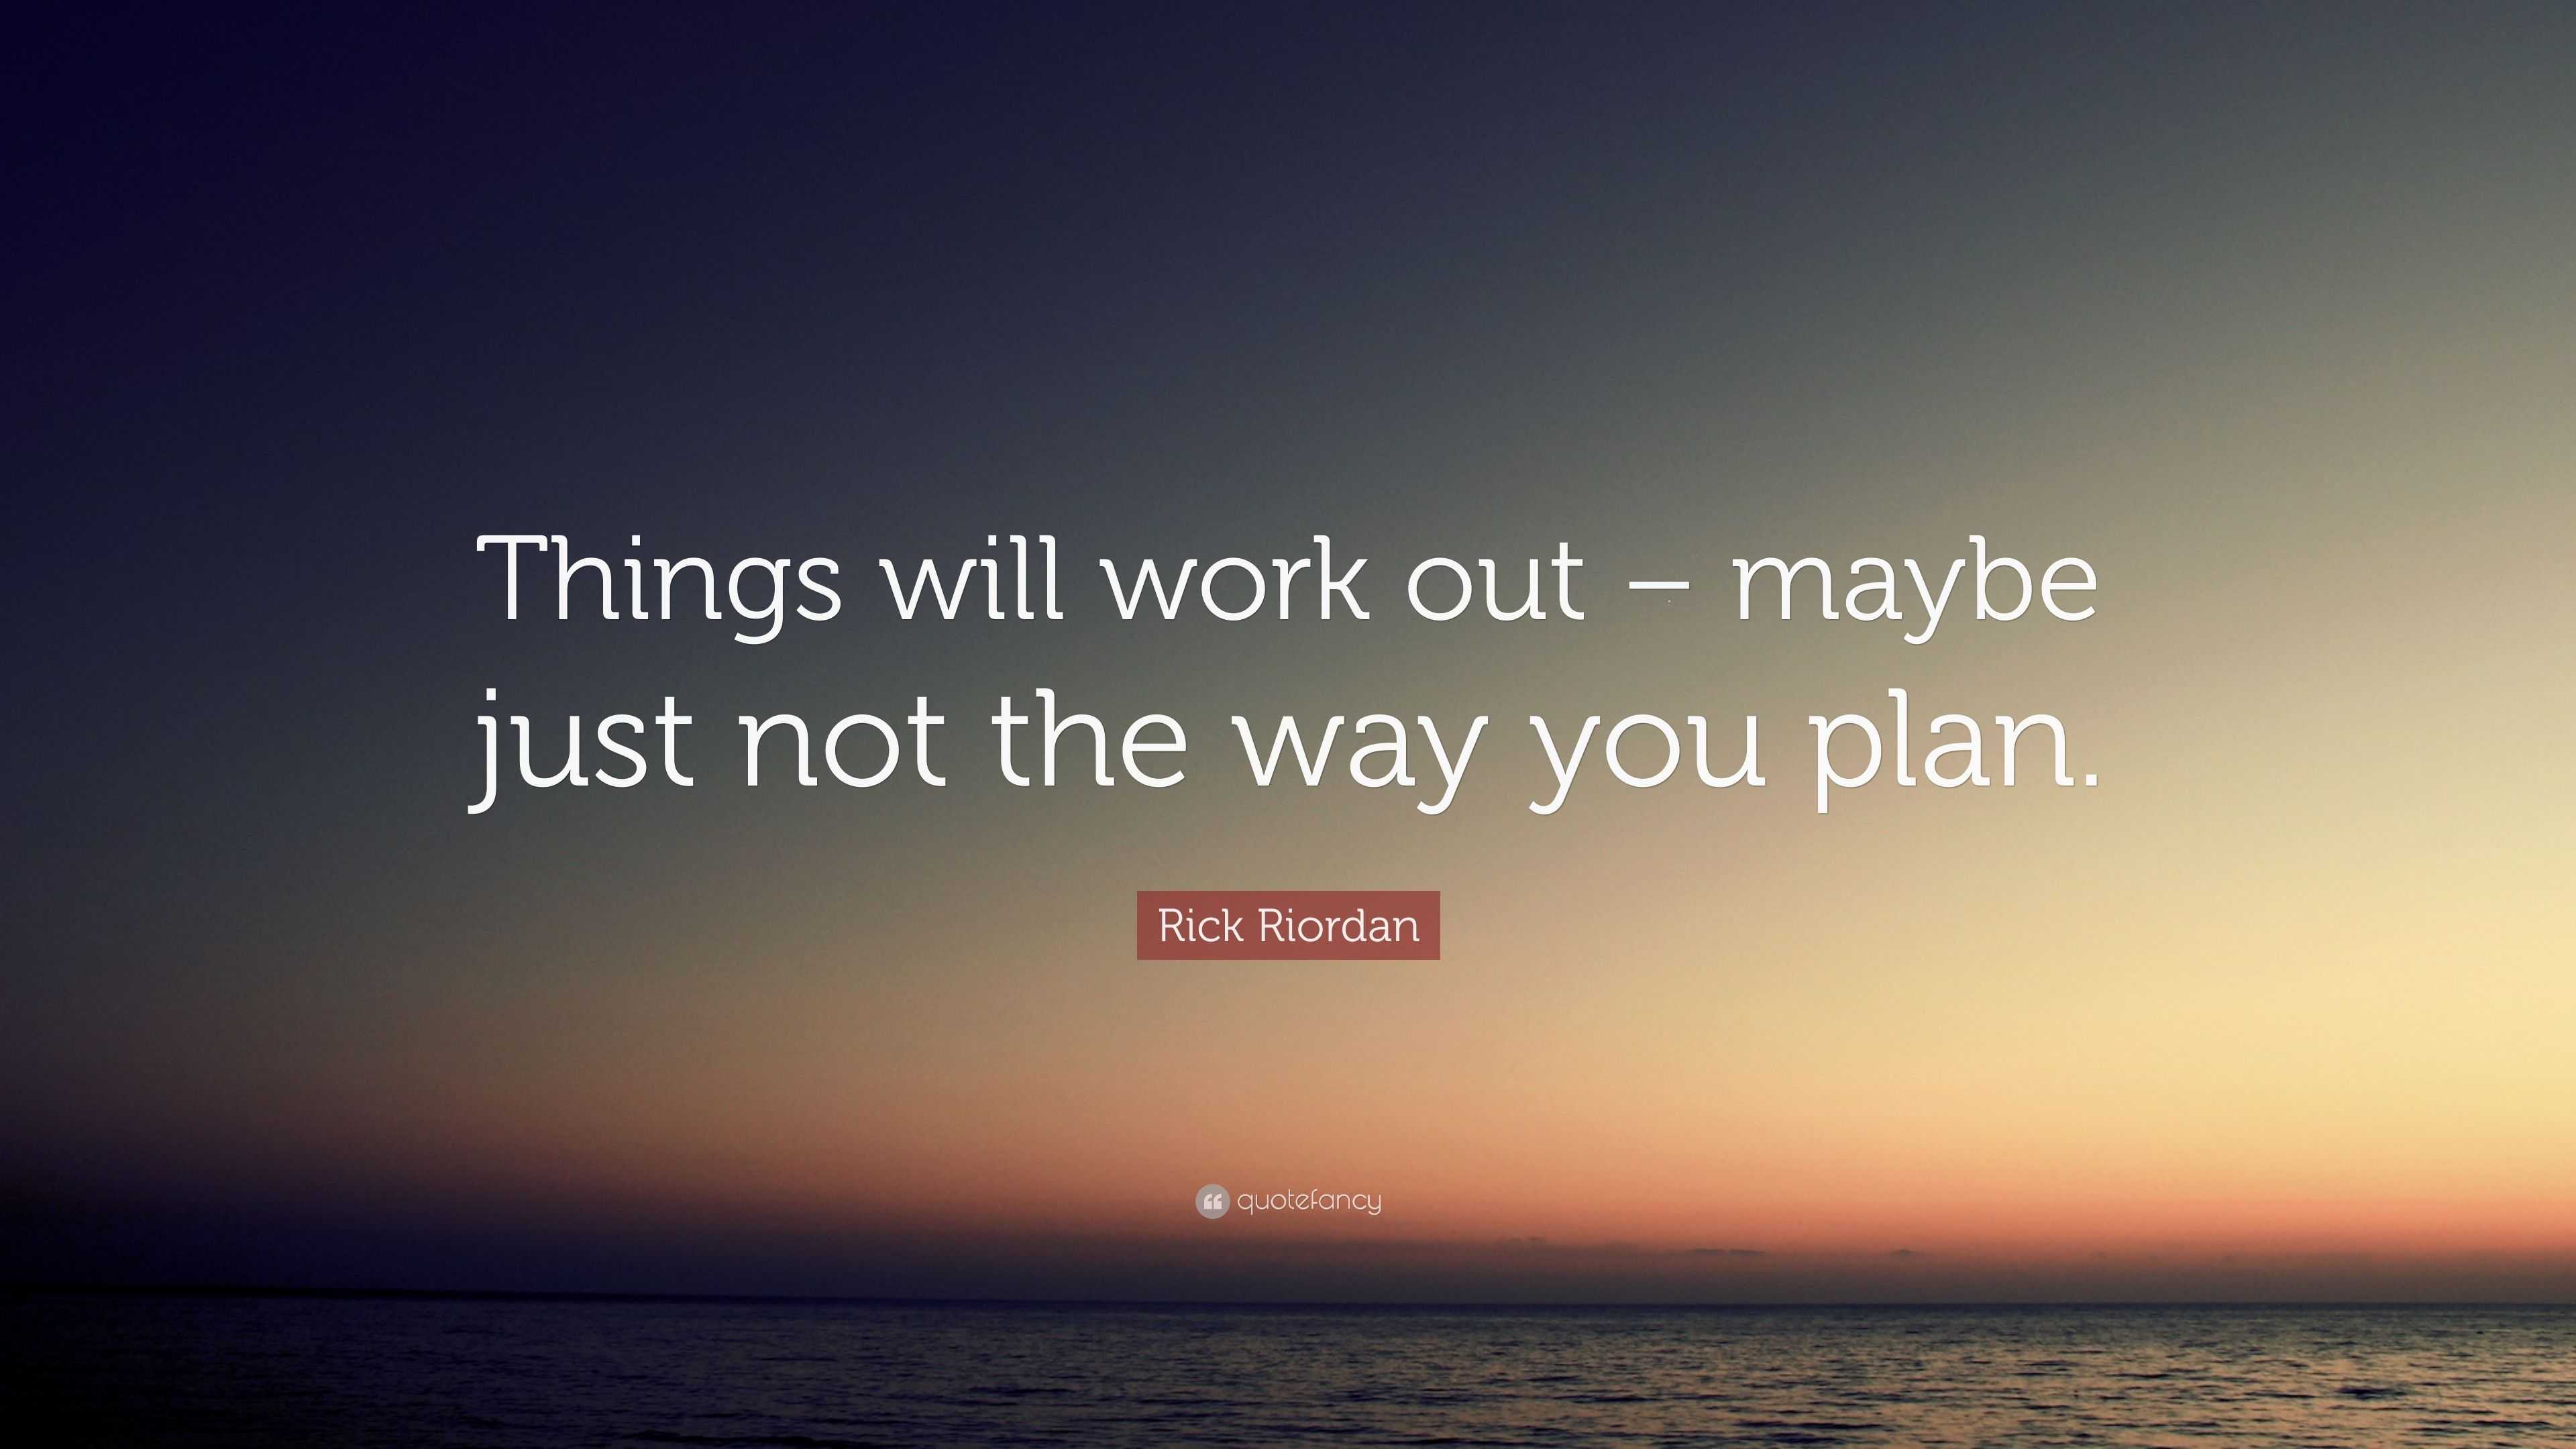 Rick Riordan Quote: “Things will work out – maybe just not the way you ...